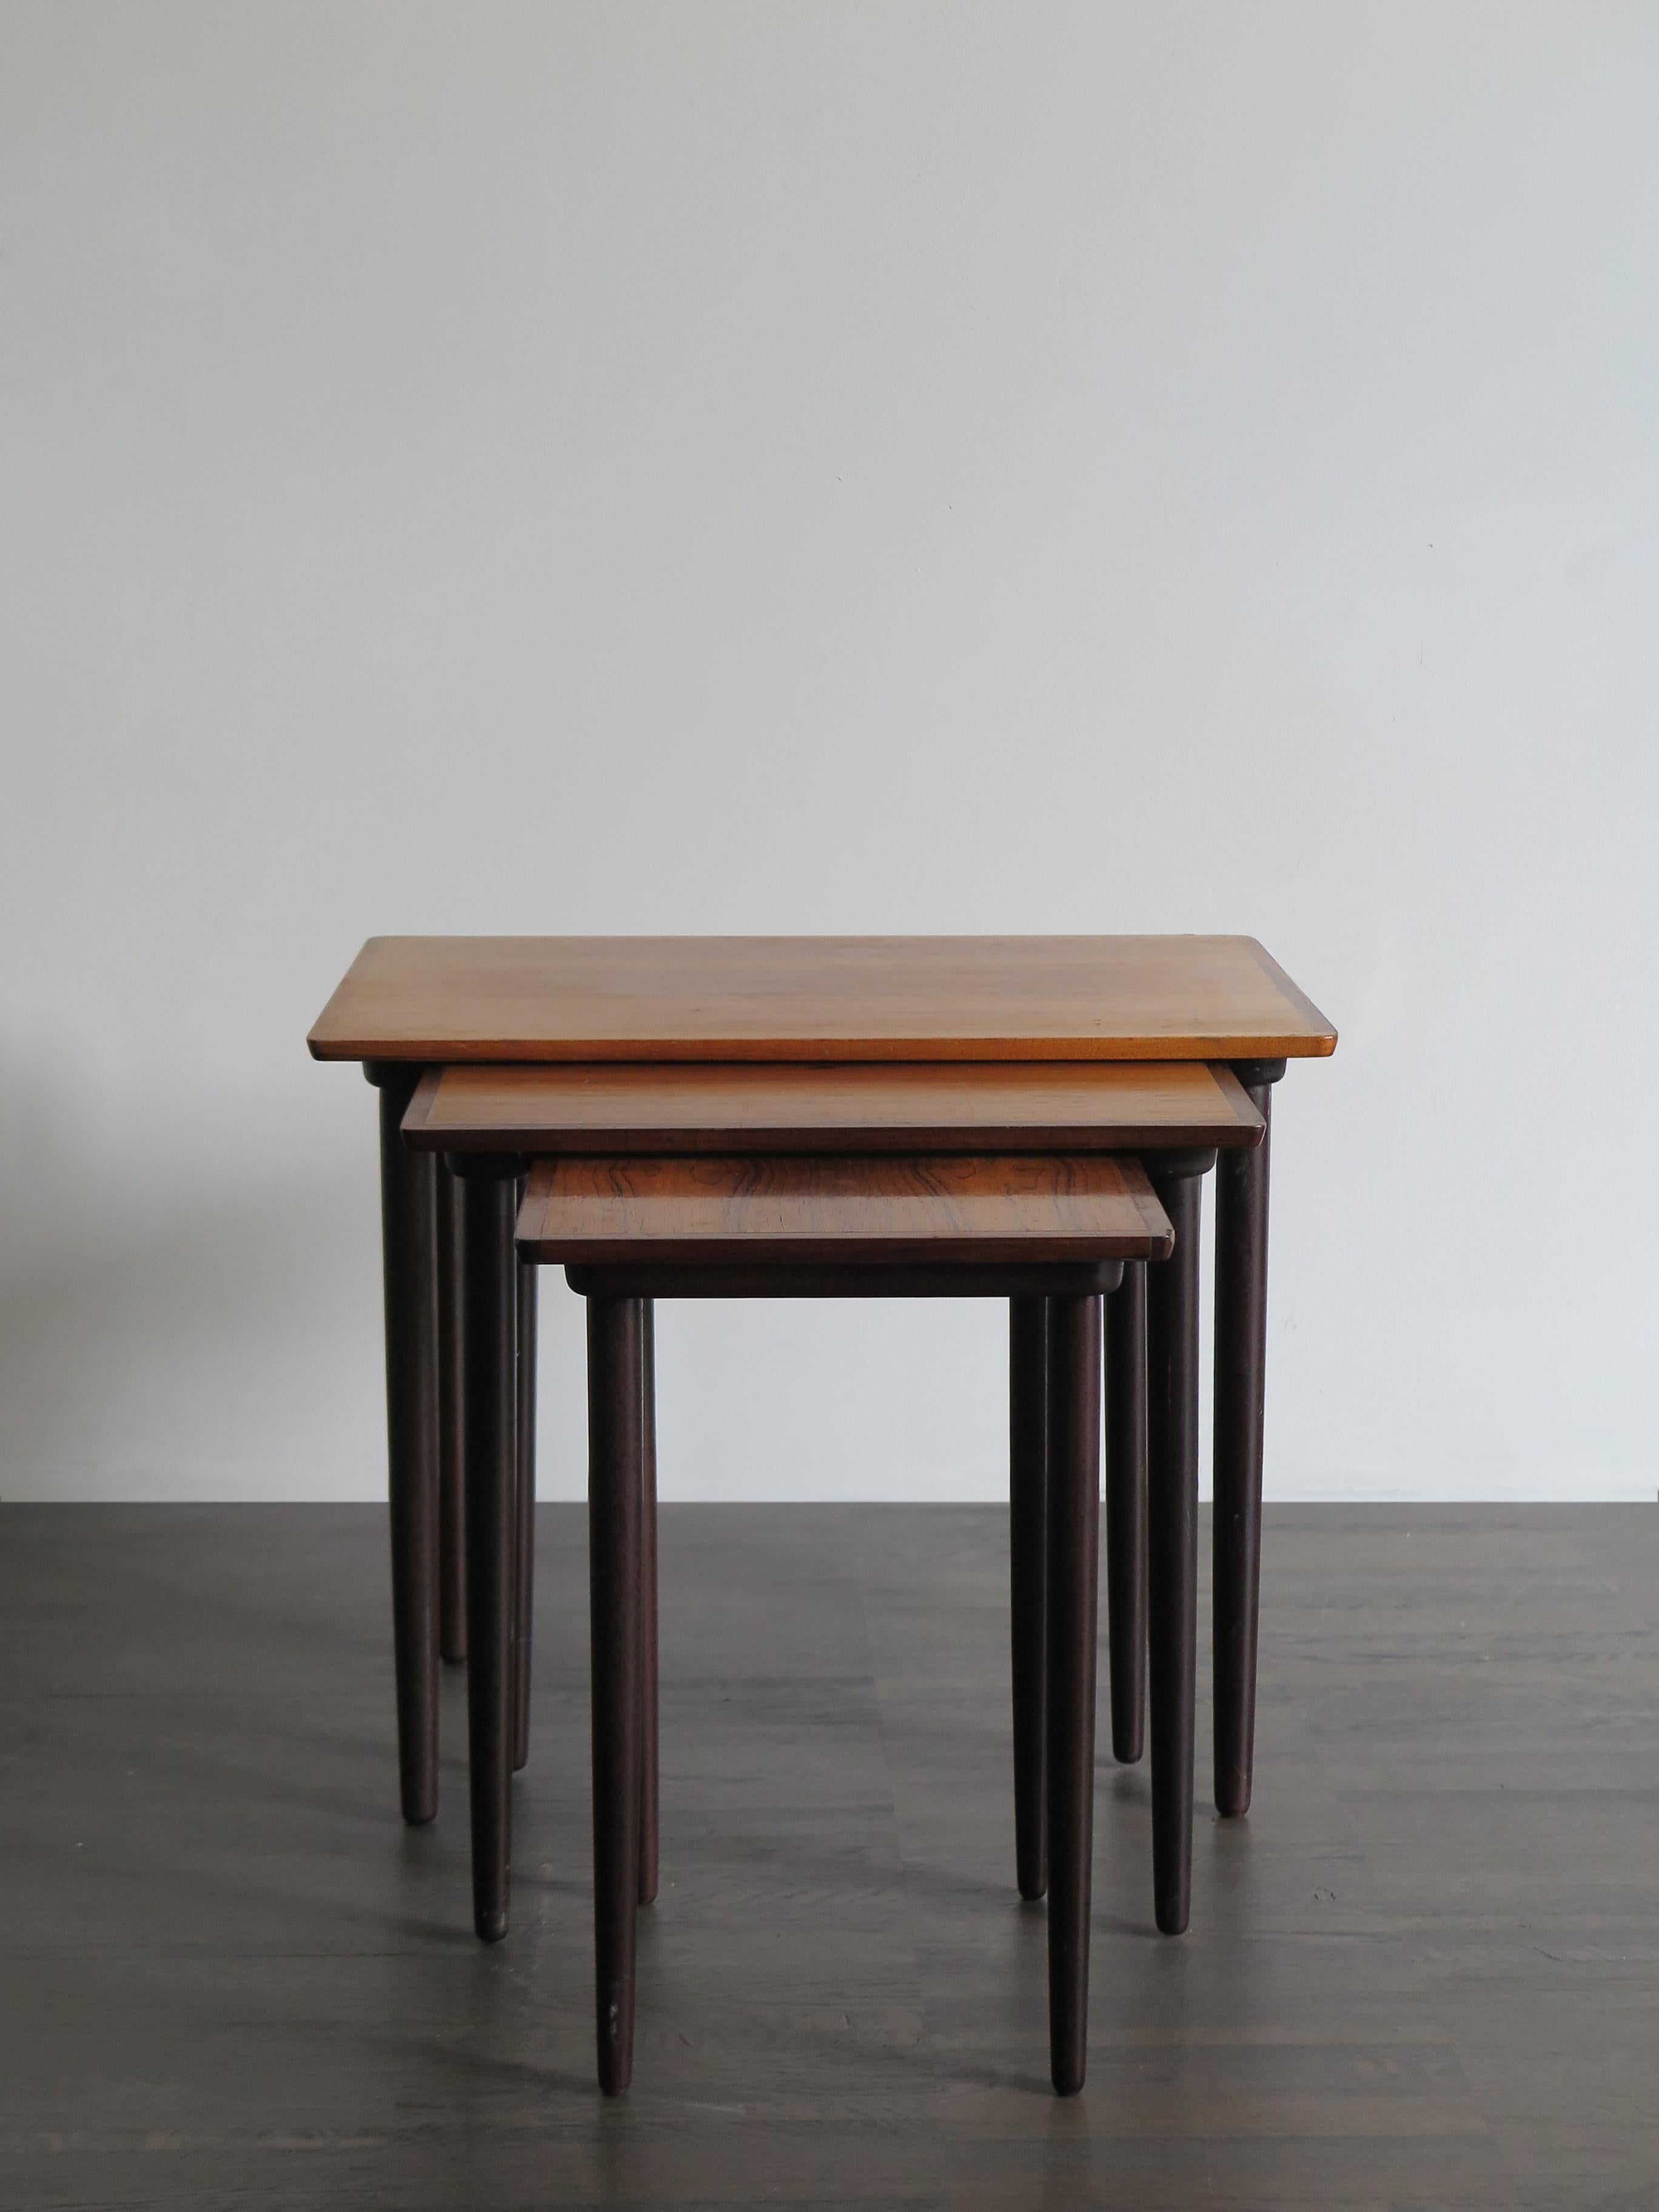 Danish nesting tables set in veneer dark wood, circa 1960, midcentury design.

Please note that the item is original of the period and this shows normal signs of age and use.